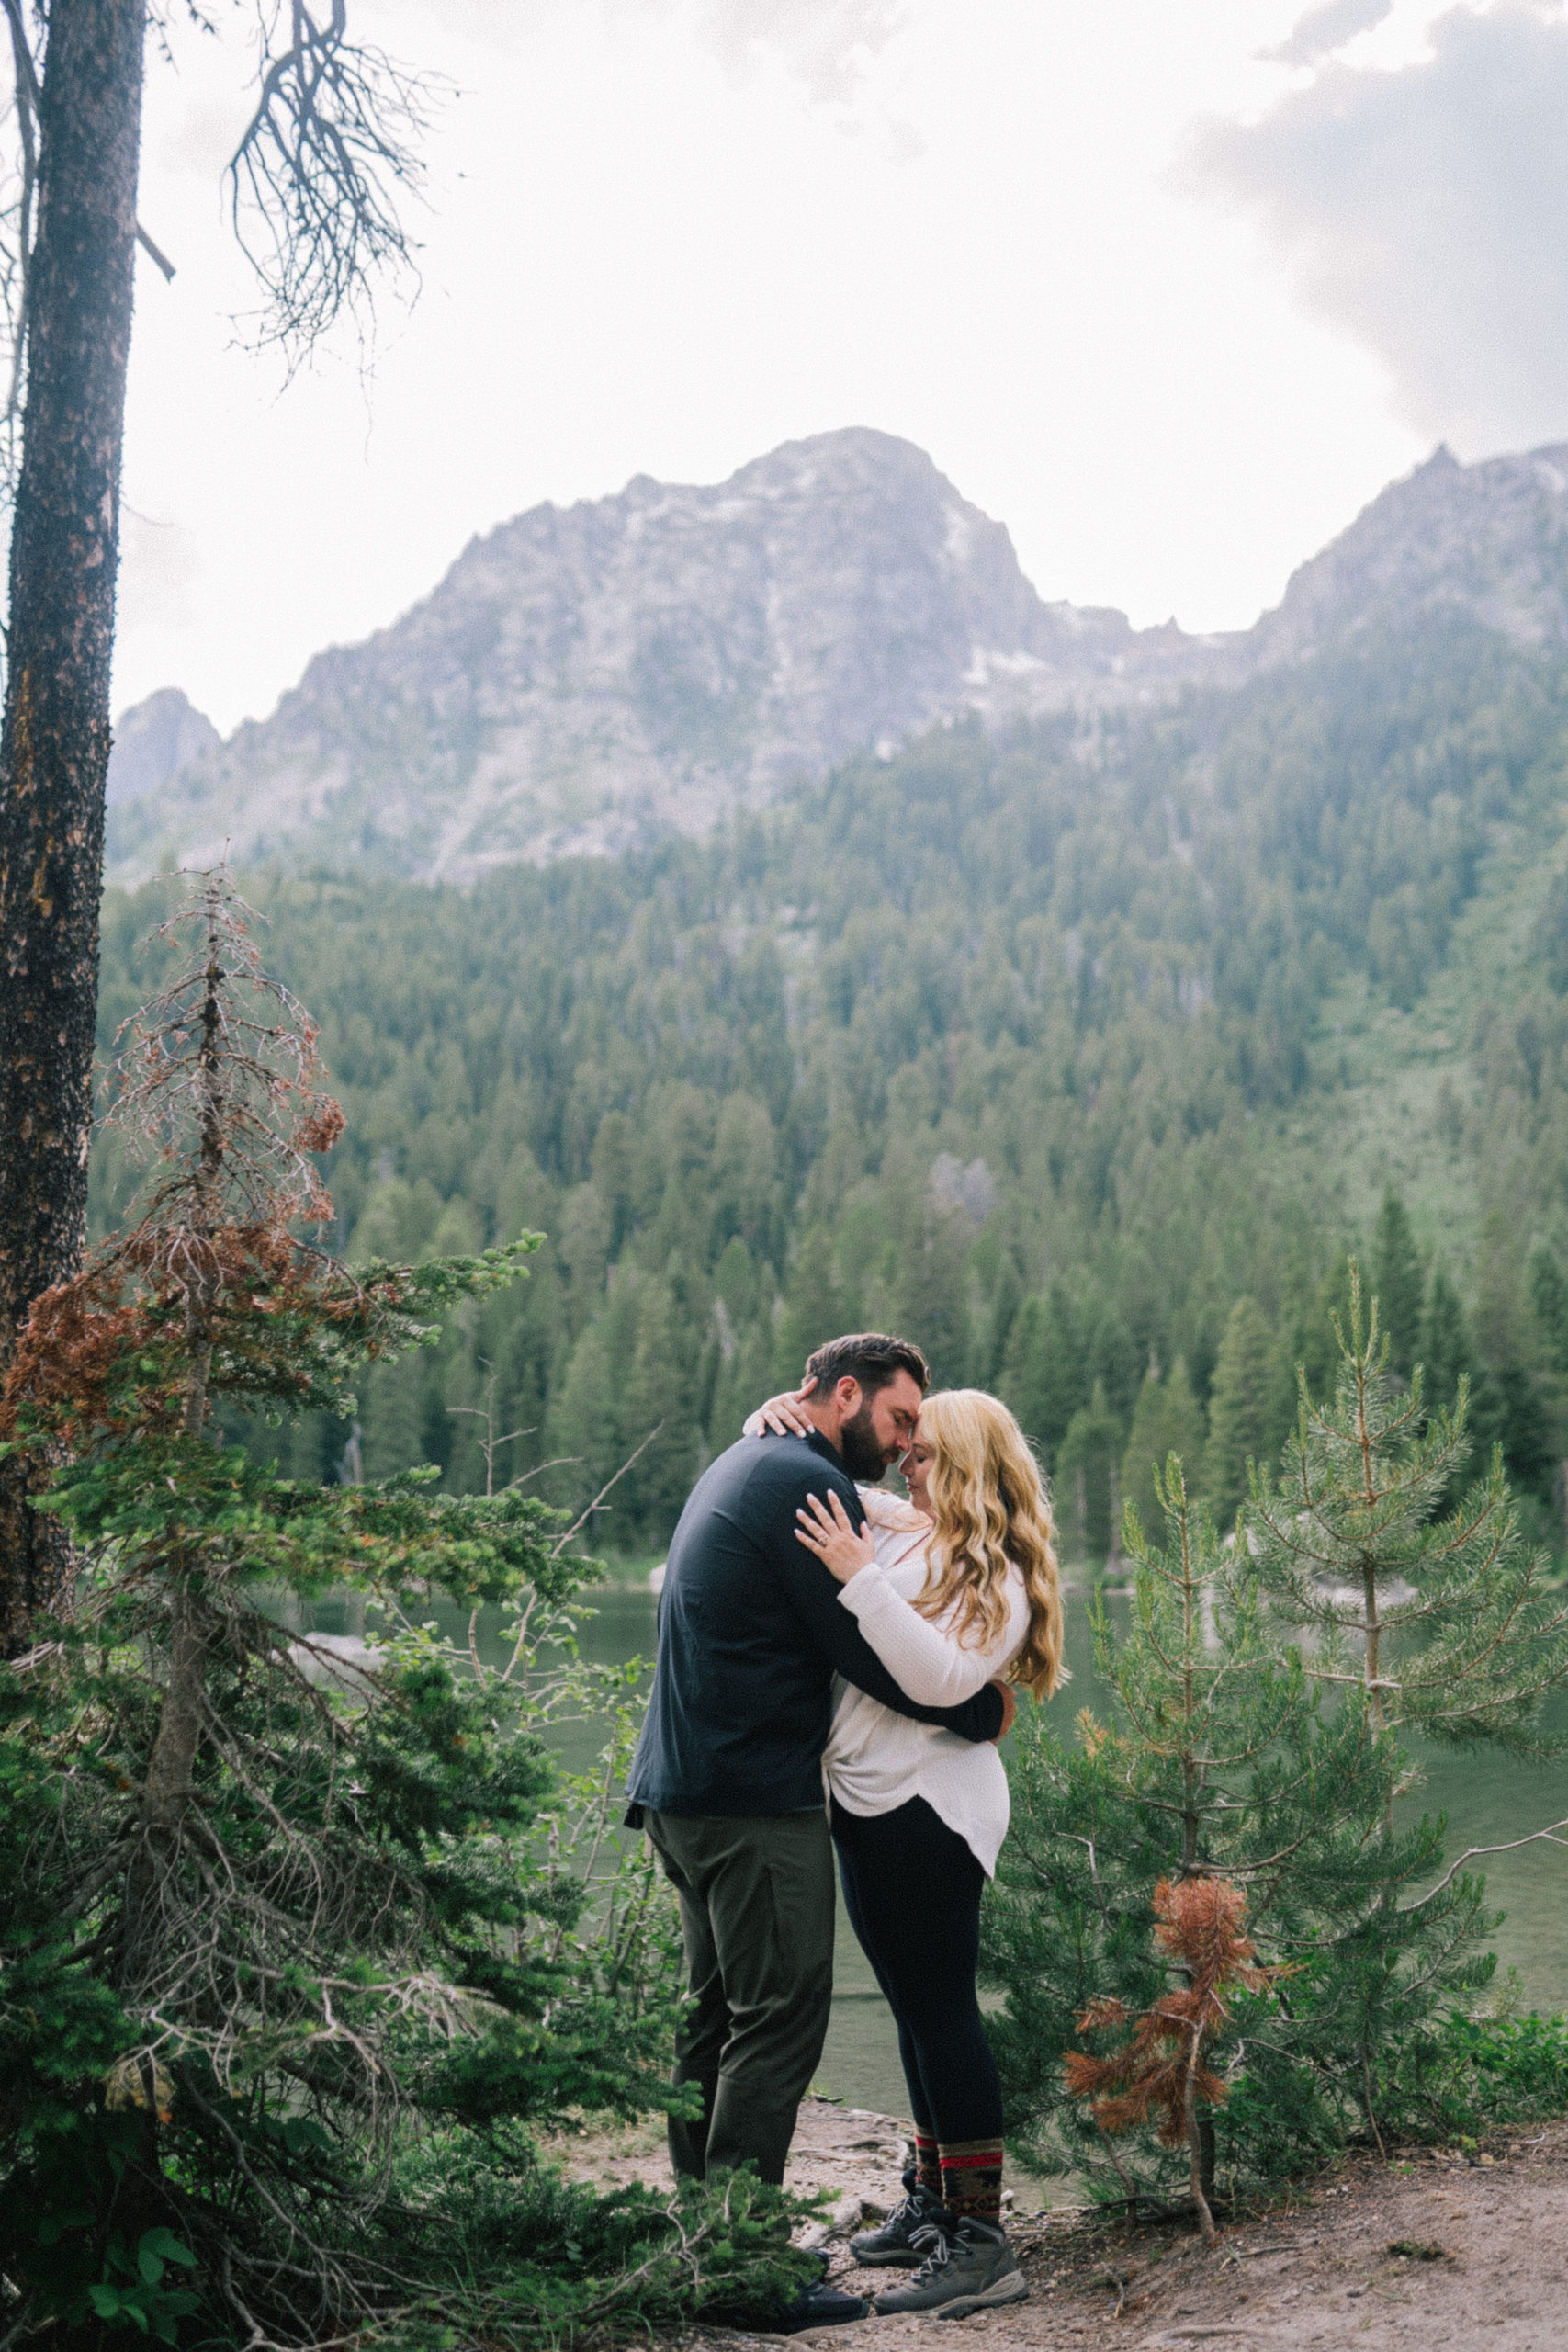 man and woman embracing one another next to a lake in the Smokies for their engagement session in the winter casual winter engagement photo outfits